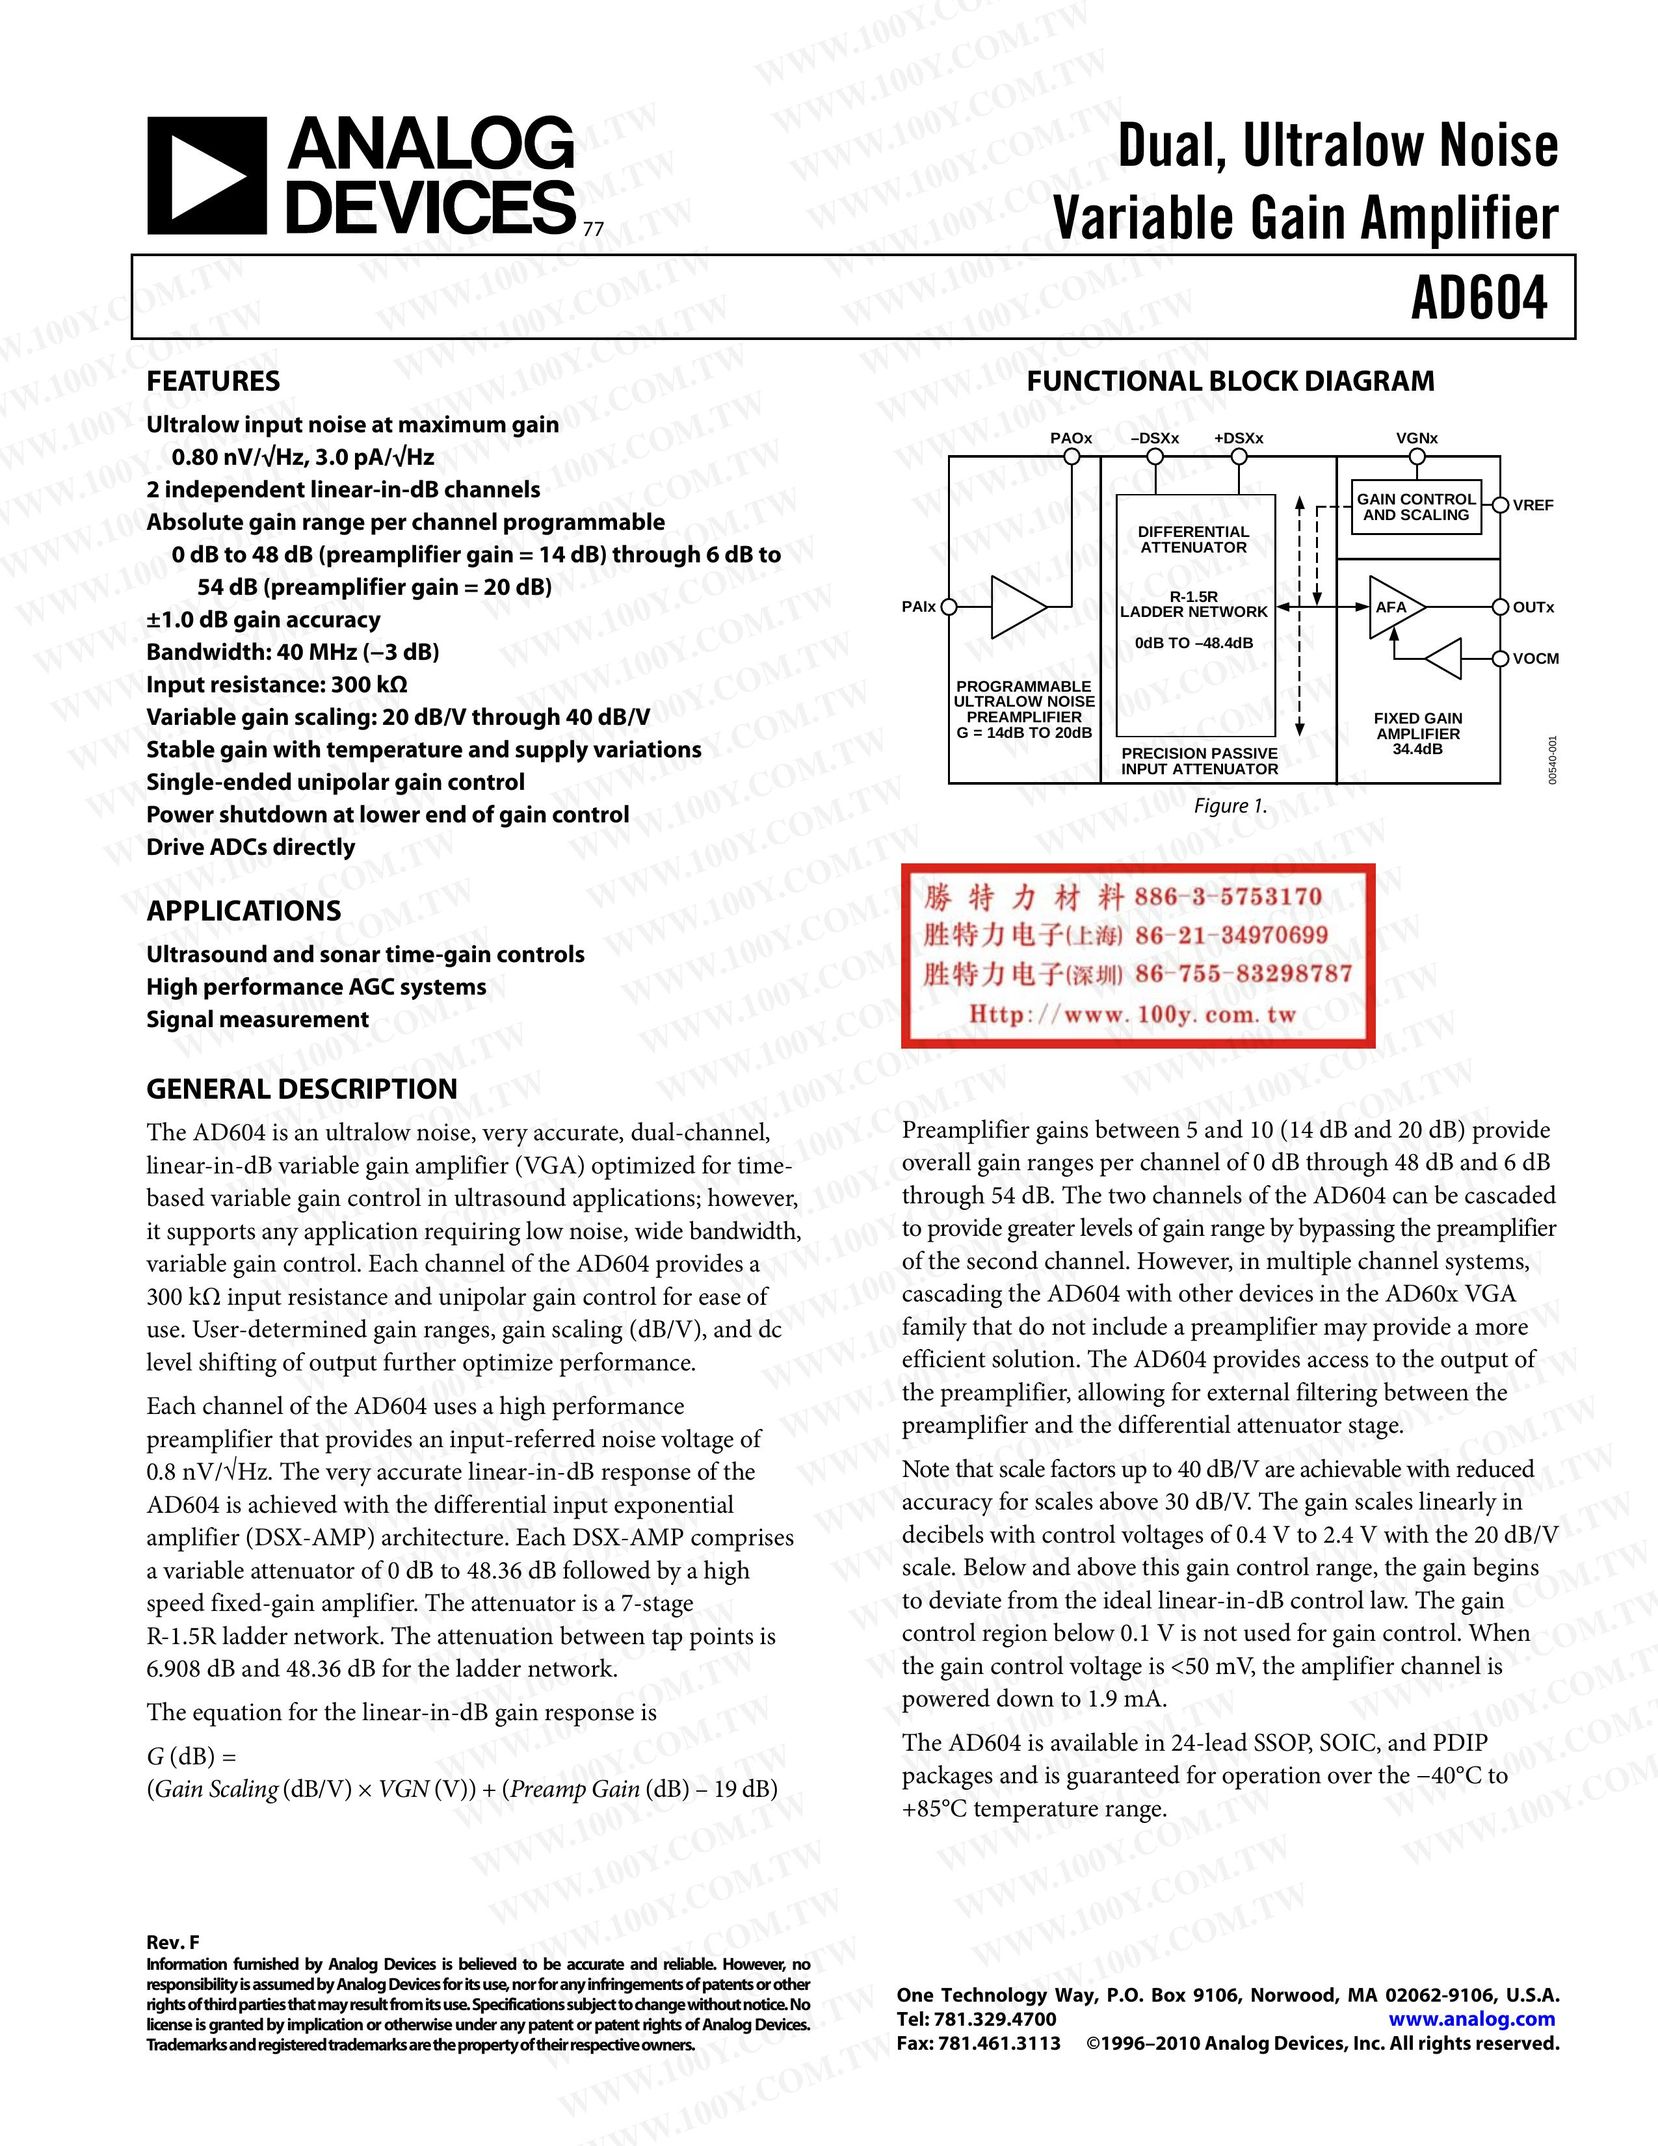 Analog Devices AD604 Car Amplifier User Manual